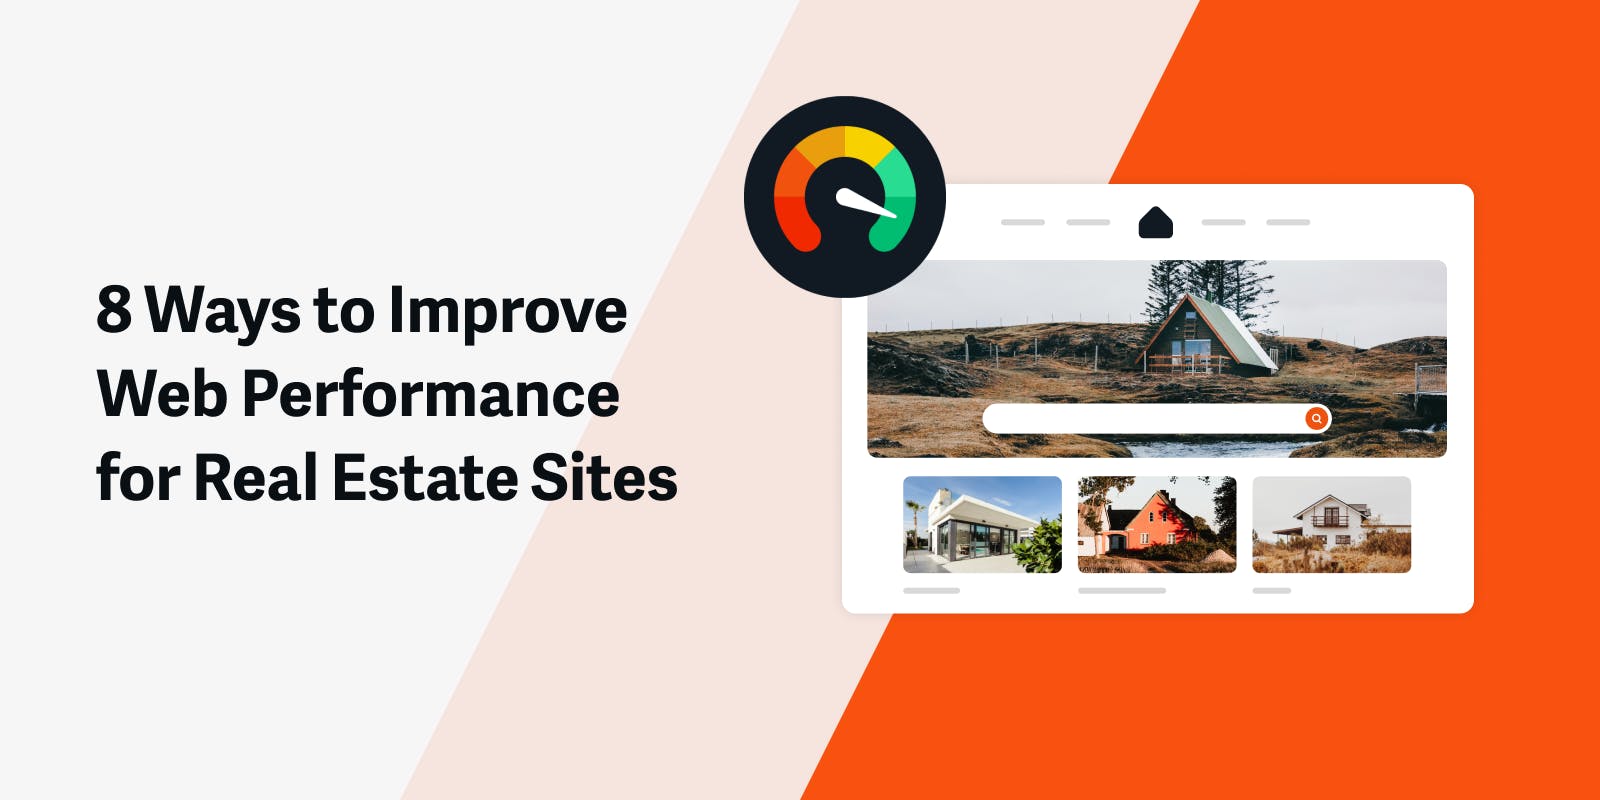 Unlock more real estate sales with faster page speed and better visual quality. See how you can improve the web performance and SEO of you real estate site. Start by automating image optimization and video encoding.